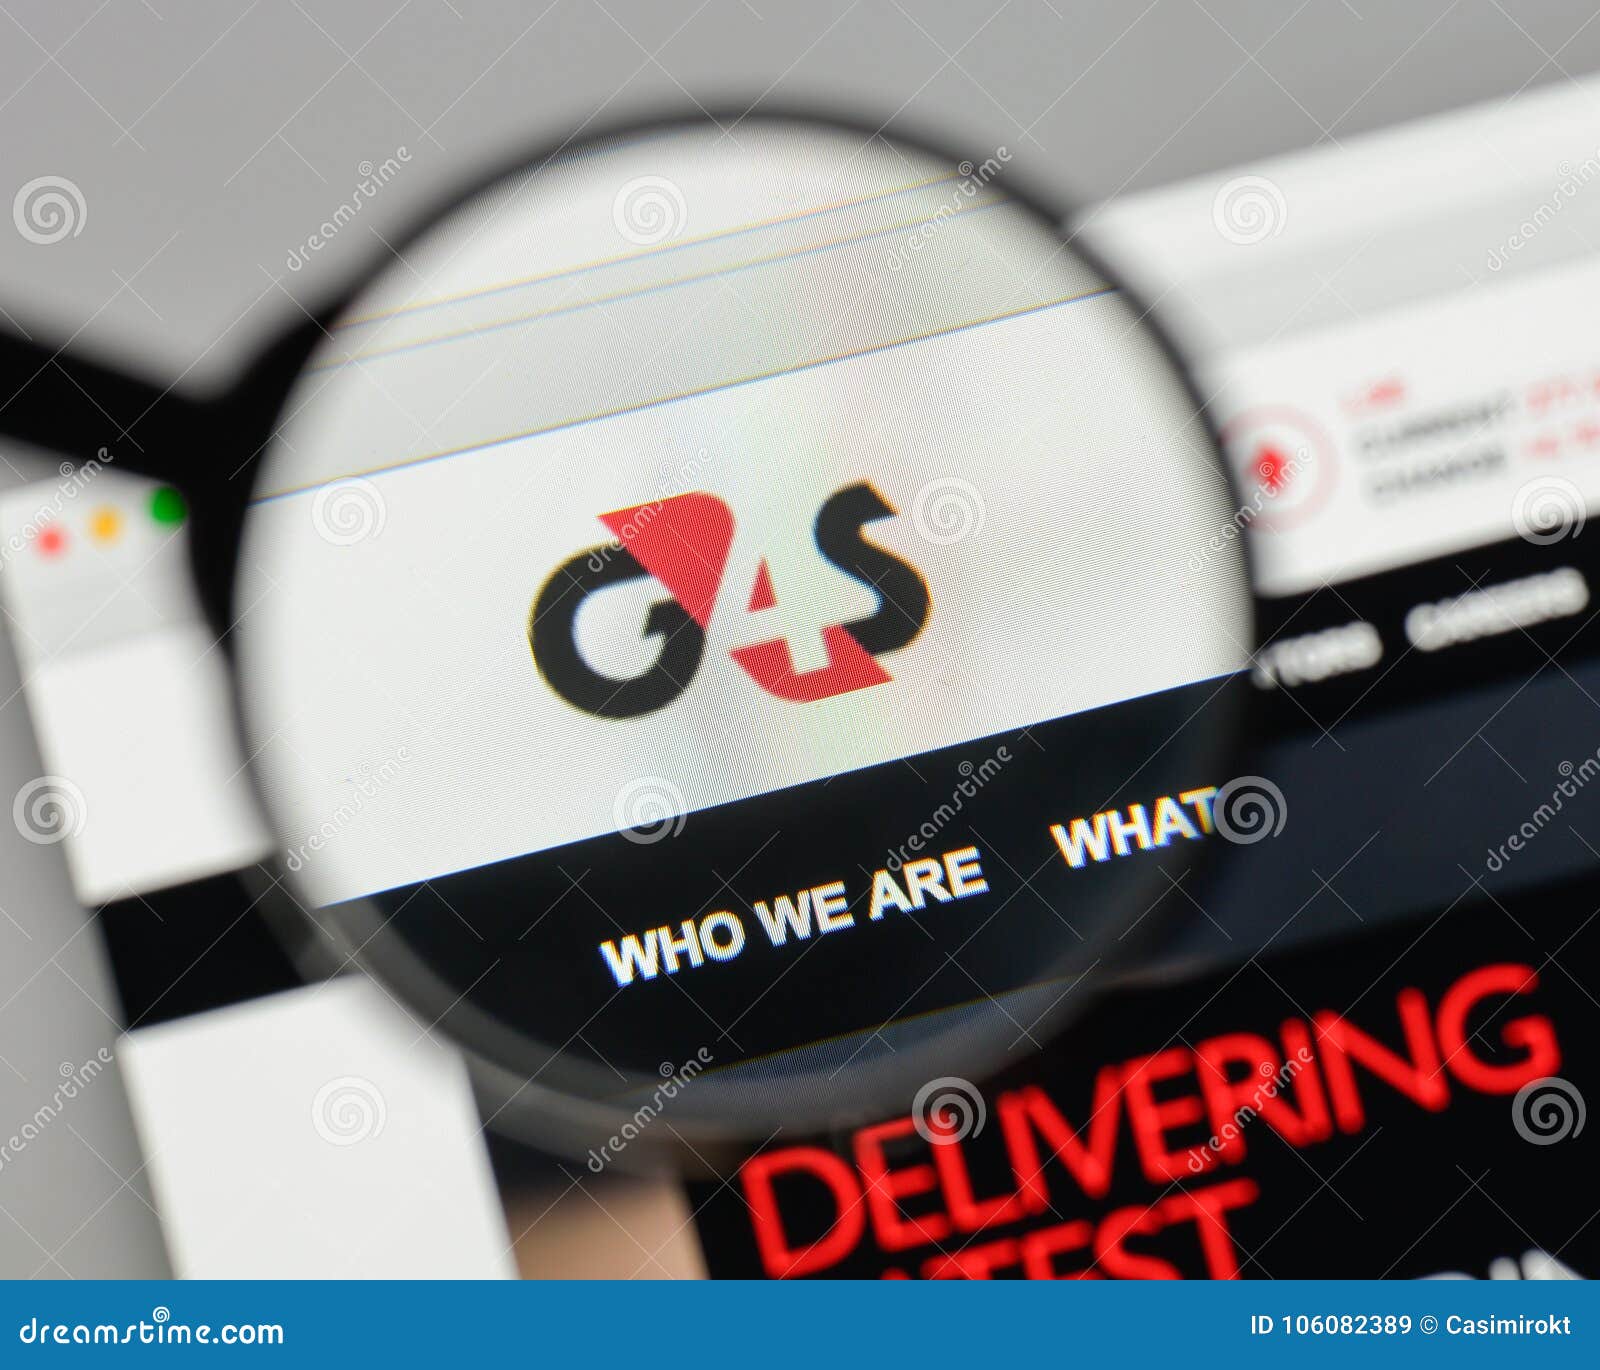 Outsourcing Giant G4S Claims £10 Million Government Coronavirus Support –  Despite £187 Million Profit – Byline Times